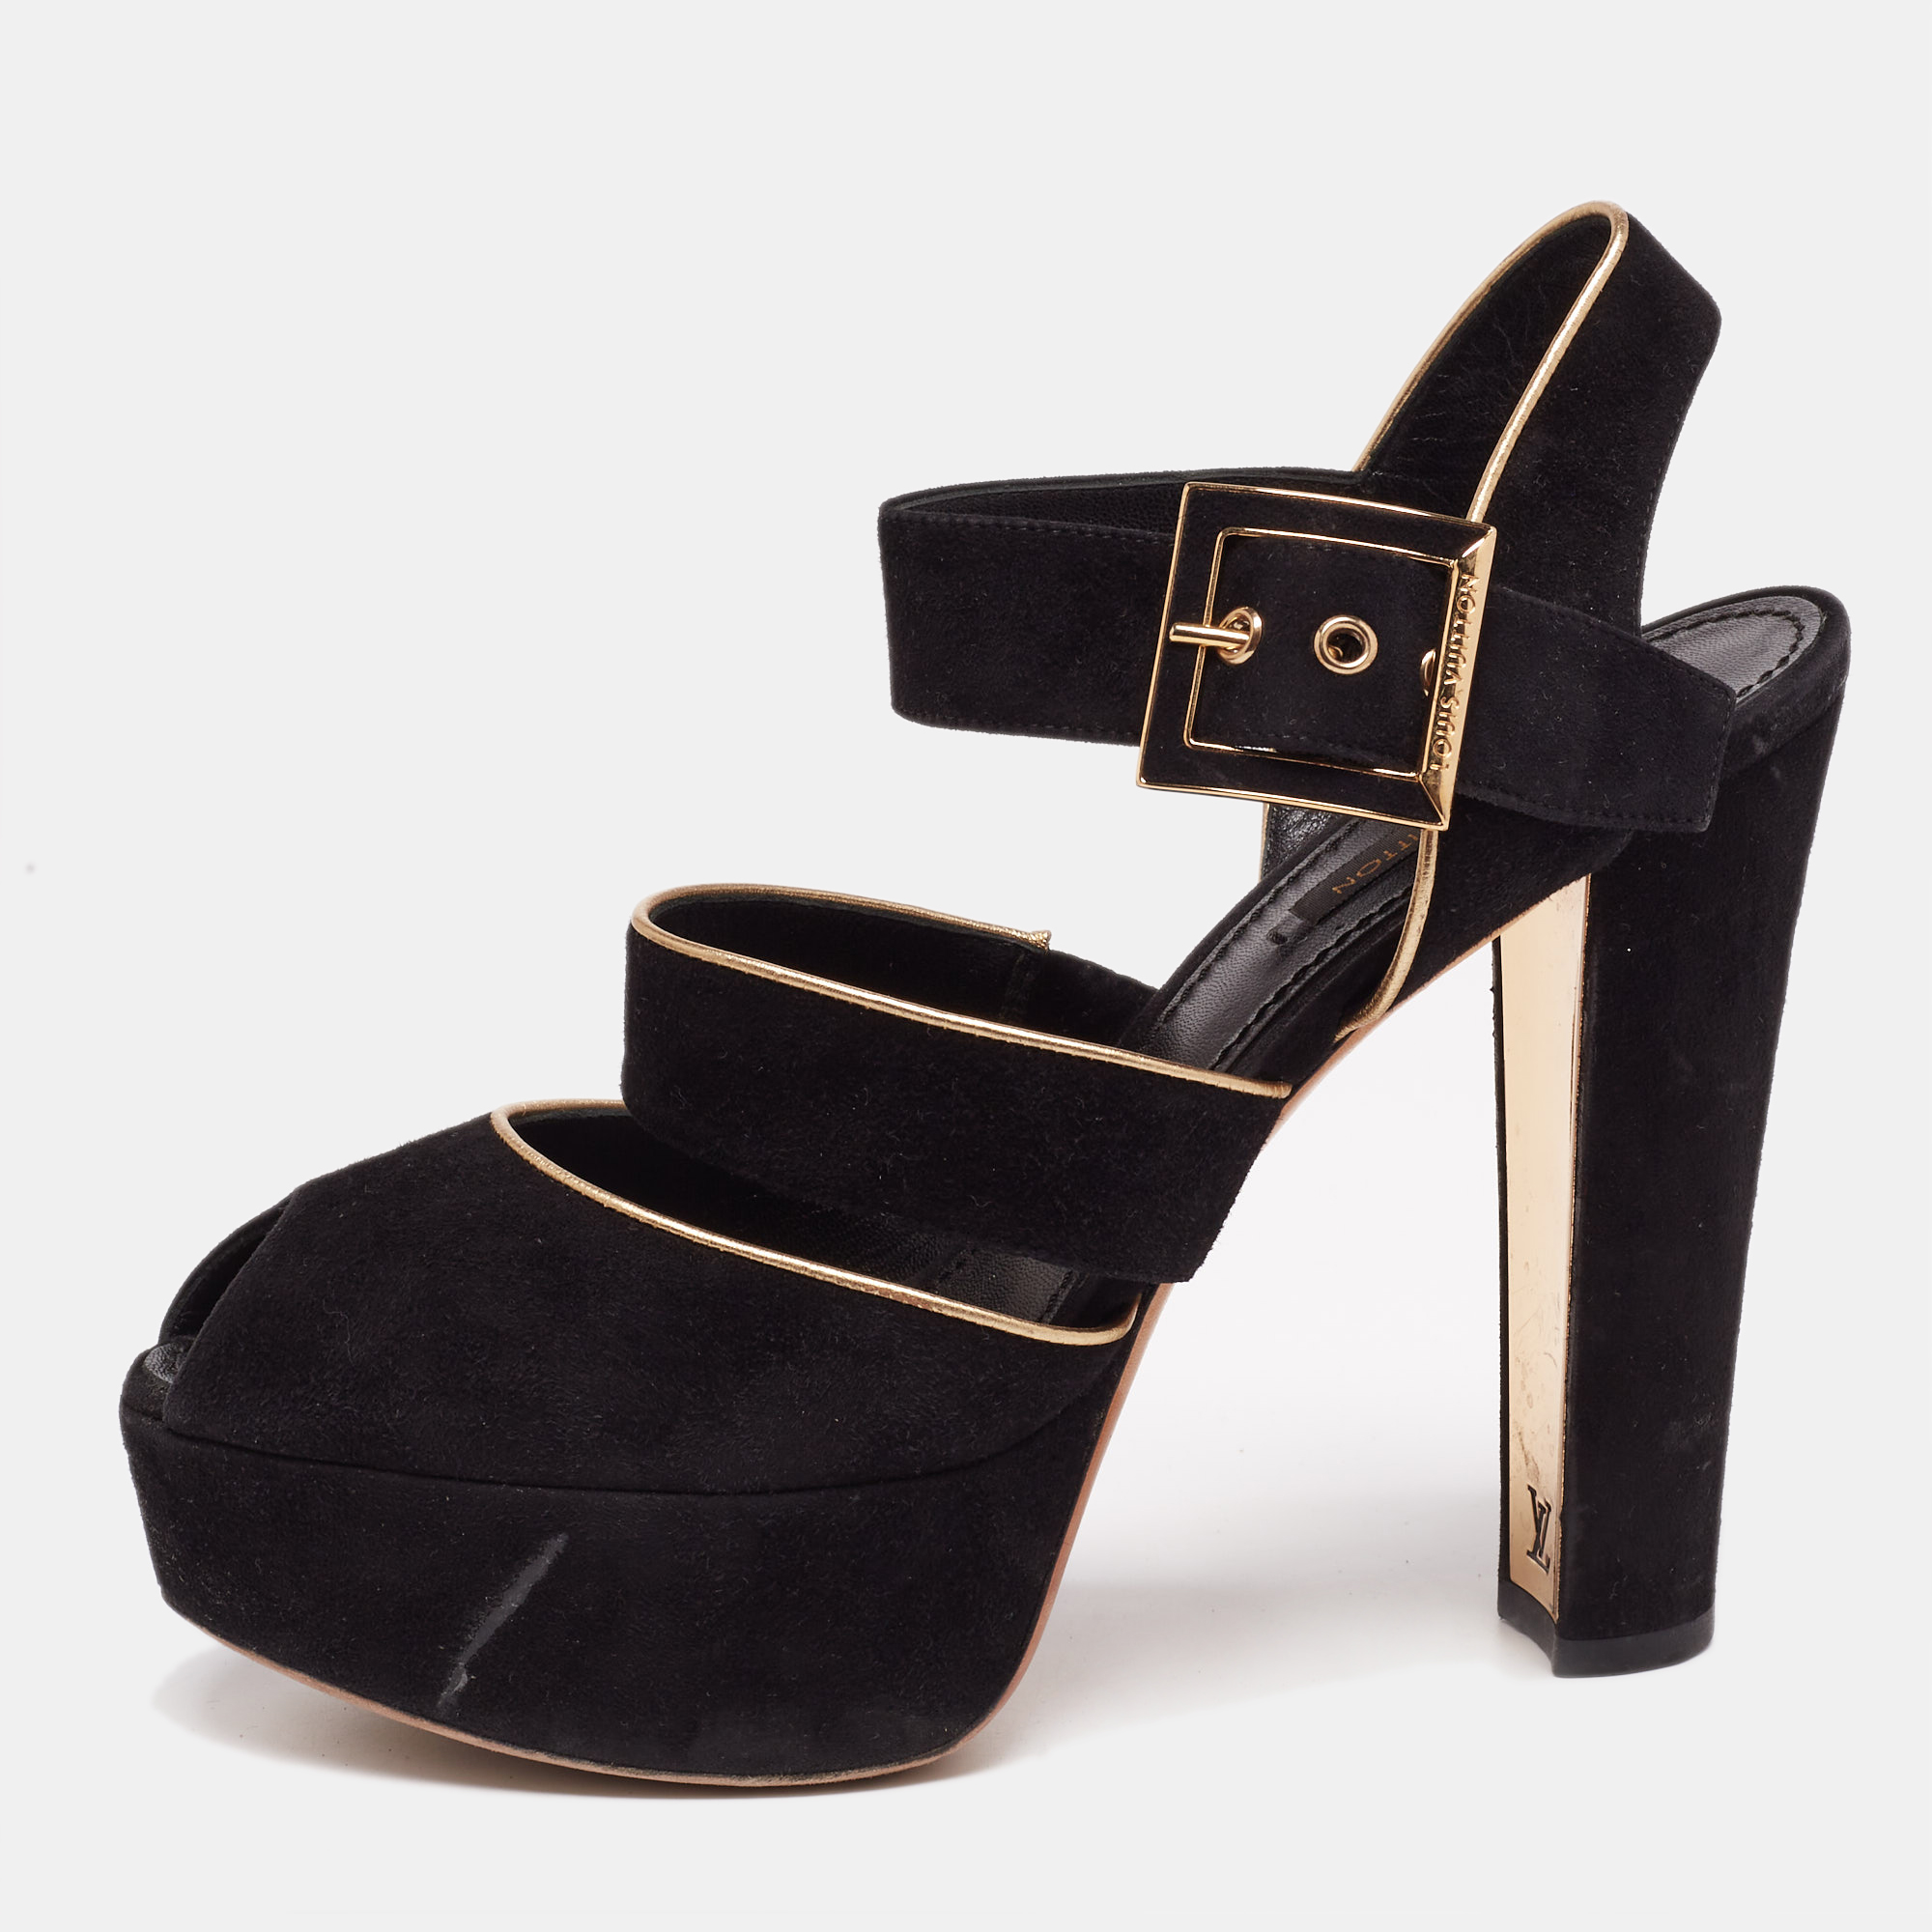 This classy pair of sandals from Louis Vuitton looks even better on the feet. The shoes have a suede exterior added with metallic trims simple buckle closure and open toes. They are lifted on platforms and 12.5 cm heels.